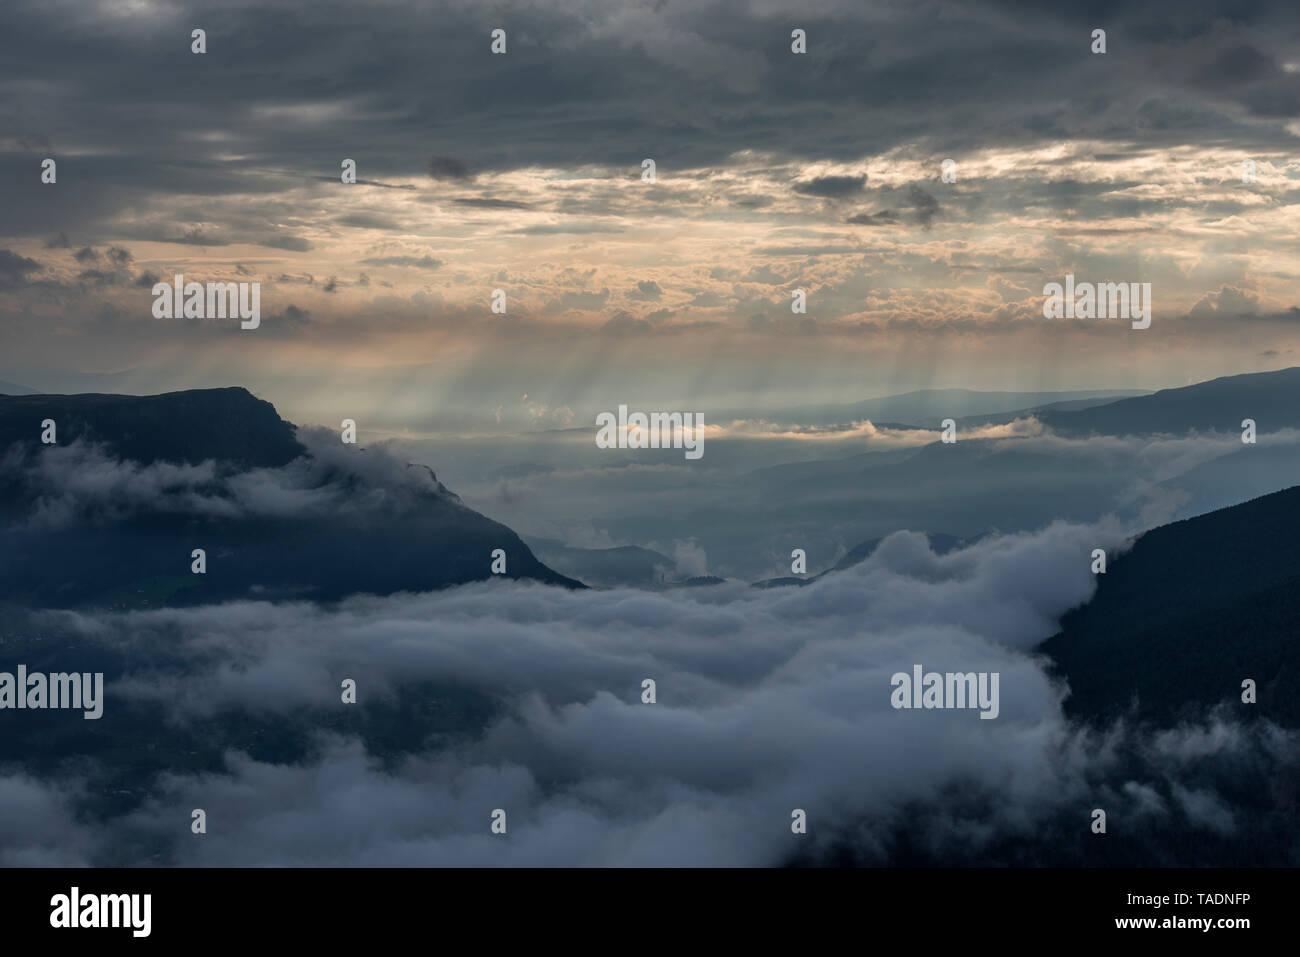 Italy, Dolomites, Sout Tyrol, View from the mountain Seceda to clouds over mountains Stock Photo